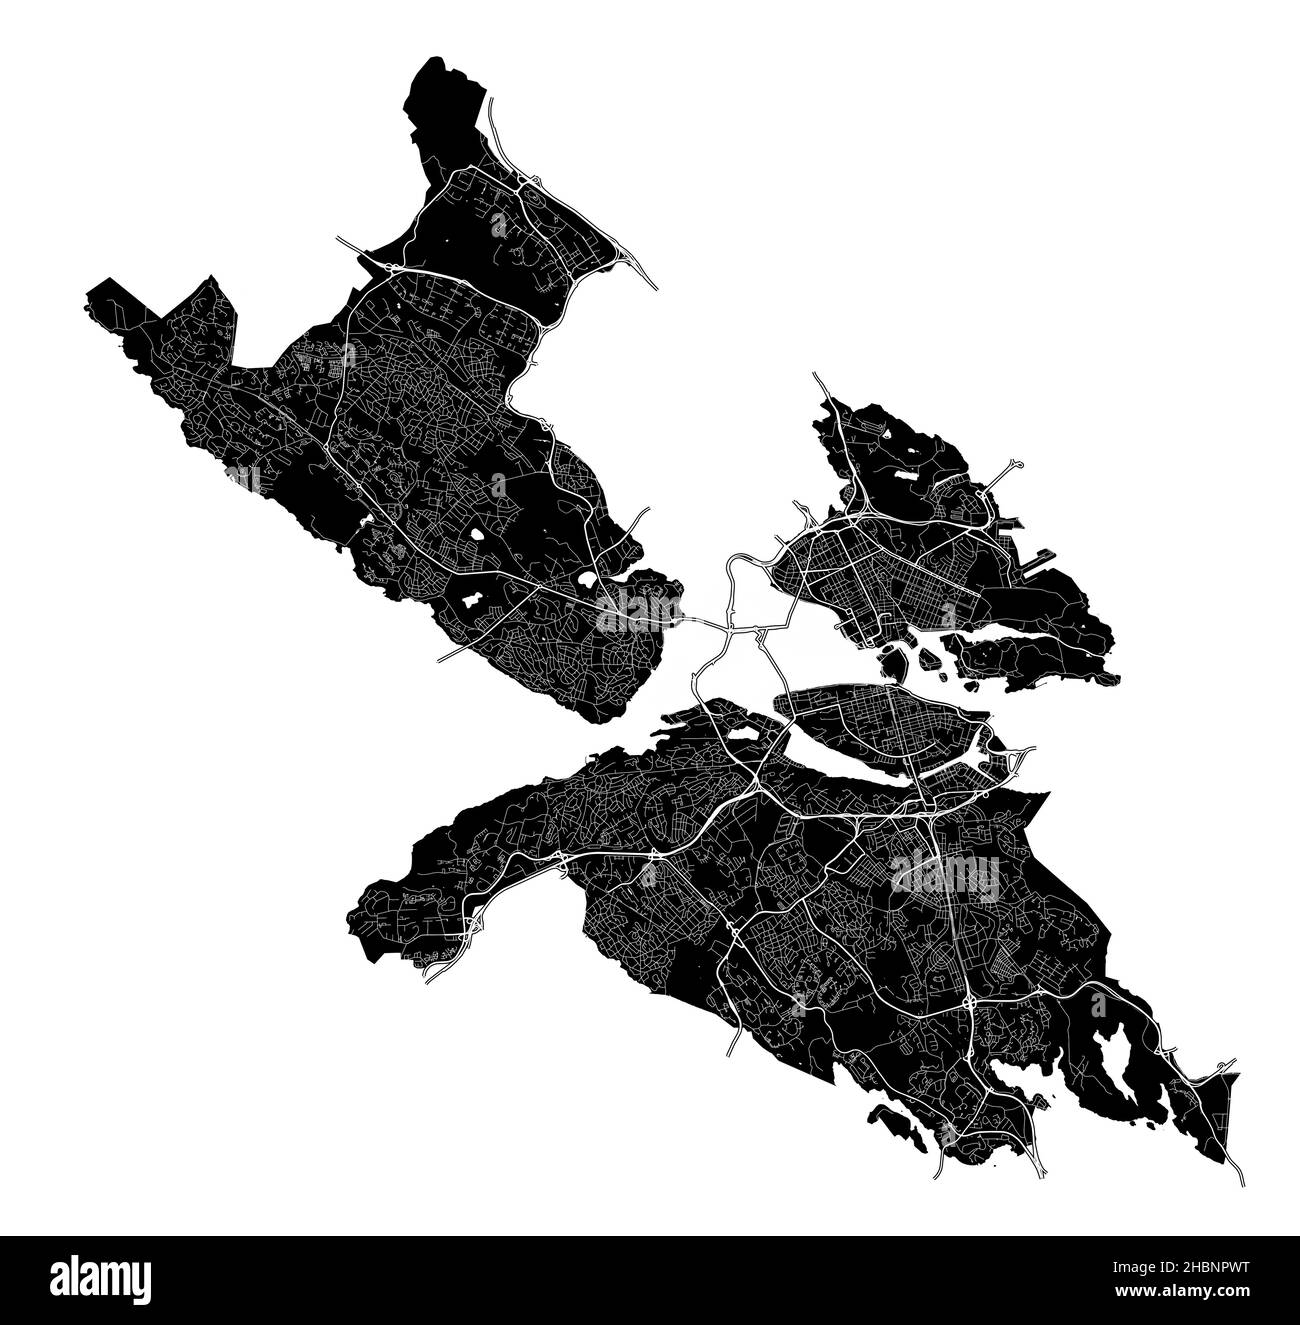 Stockholm, Sweden, high resolution vector map with city boundaries, and editable paths. The city map was drawn with white areas and lines for main roa Stock Vector